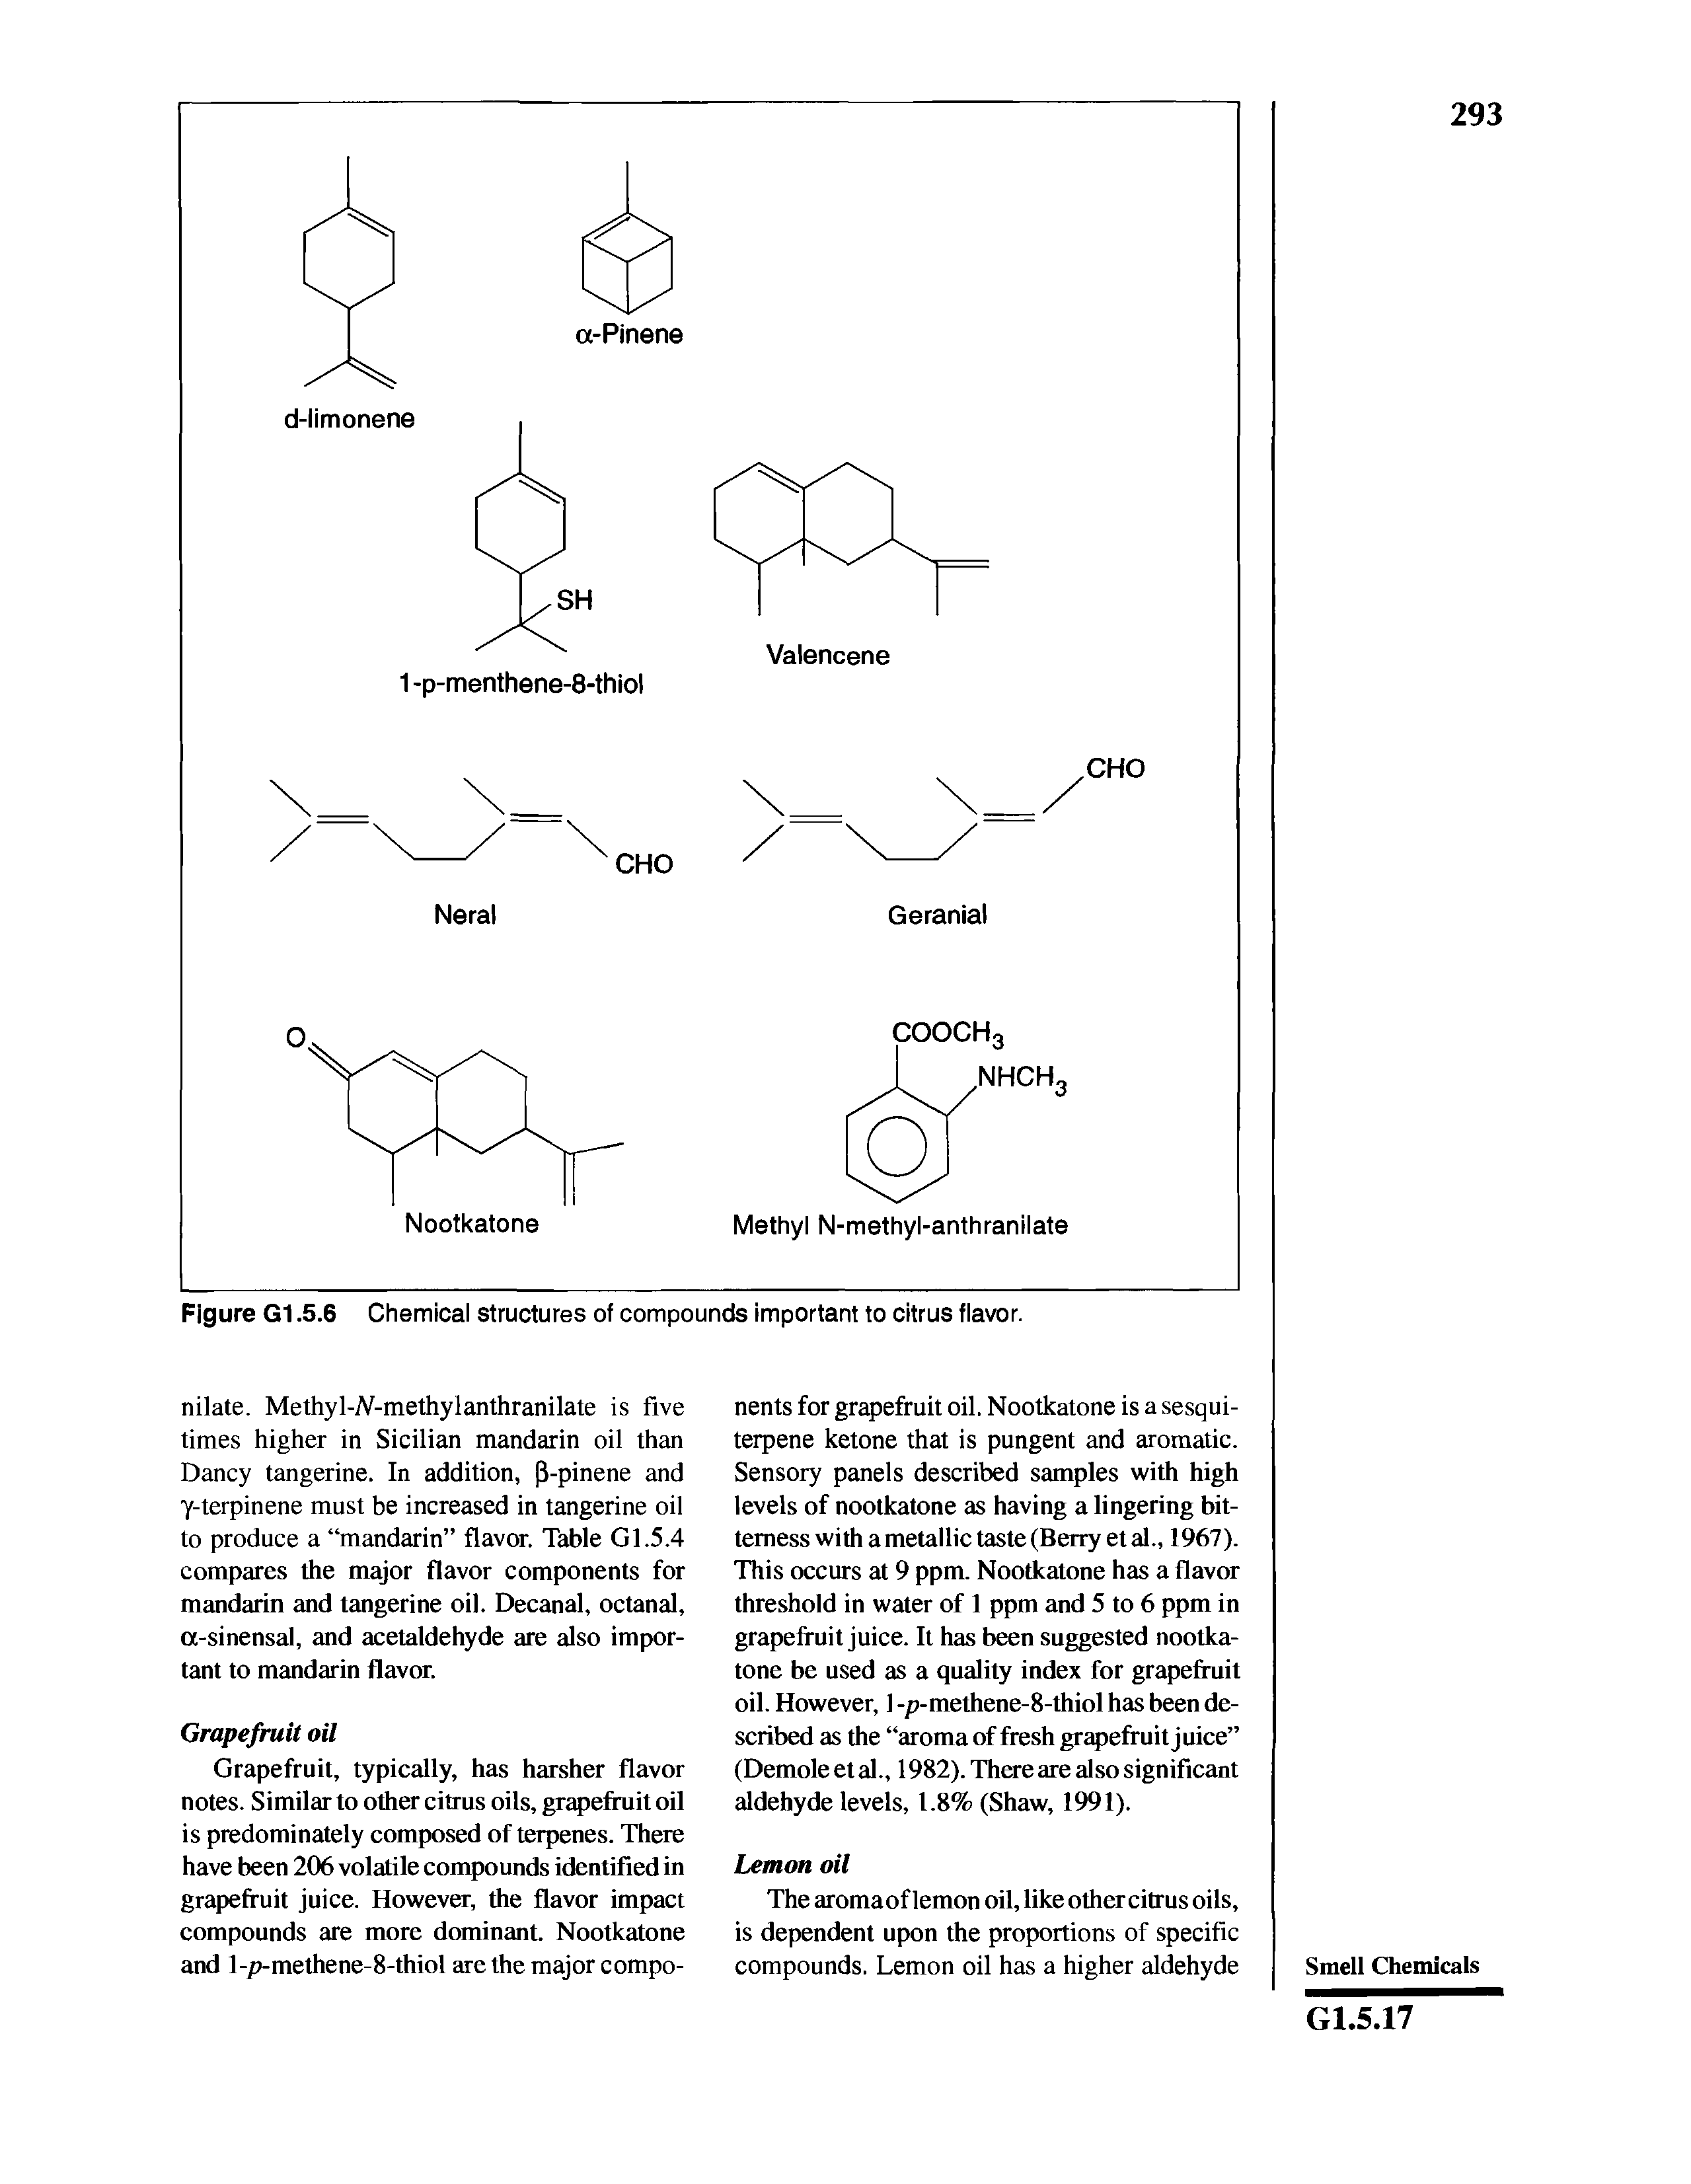 Figure G1.5.6 Chemical structures of compounds important to citrus flavor.